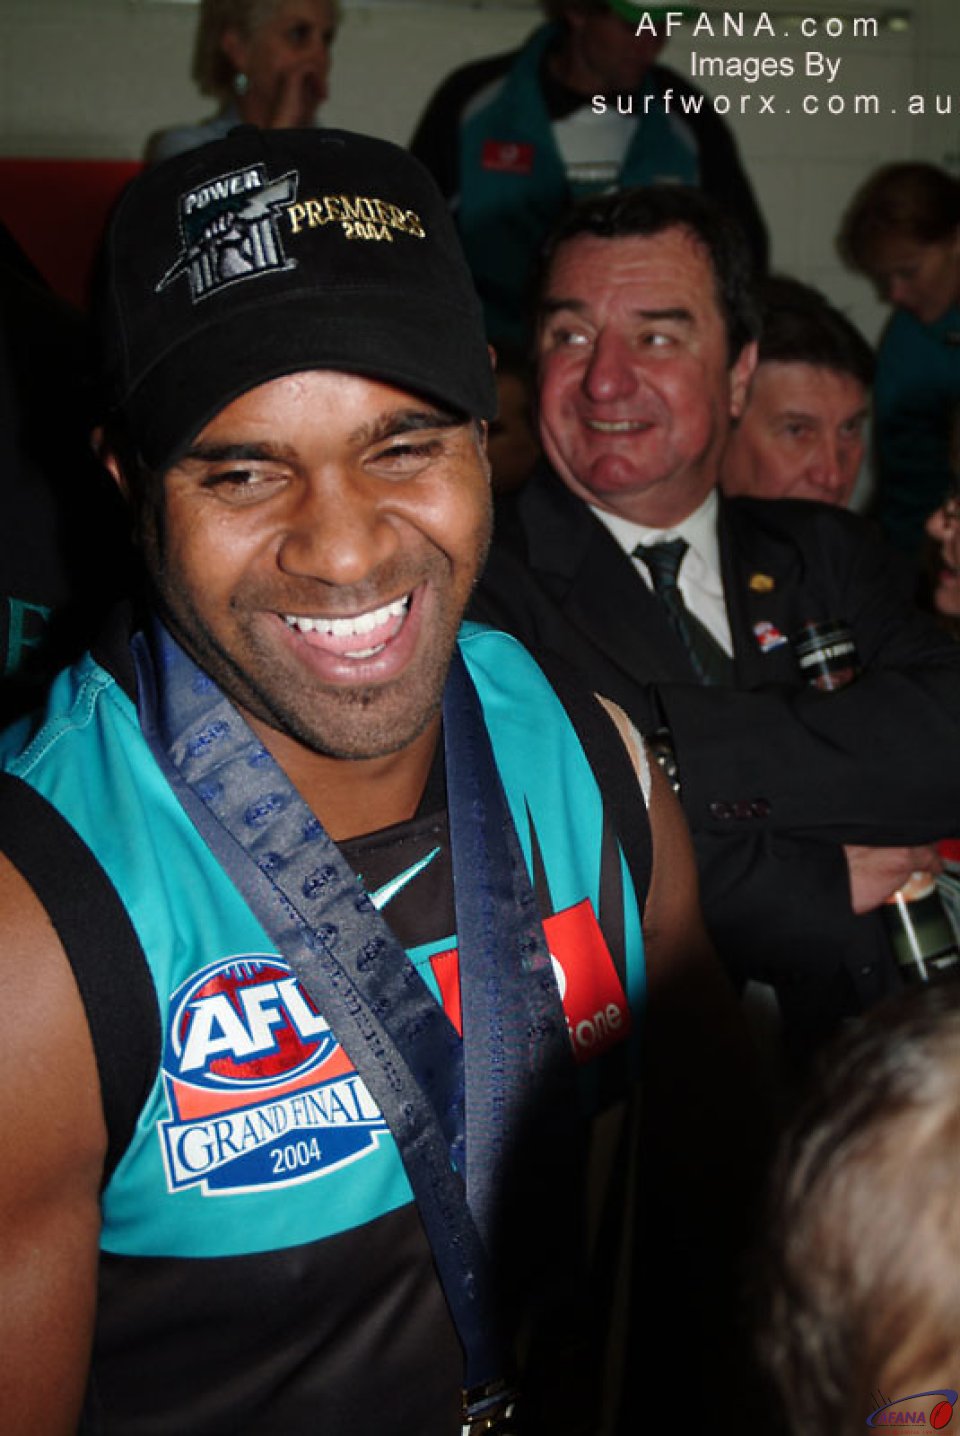 Byron Pickett, winner of the 2004 Norm Smith Medal, for best on ground in the Grand Final.